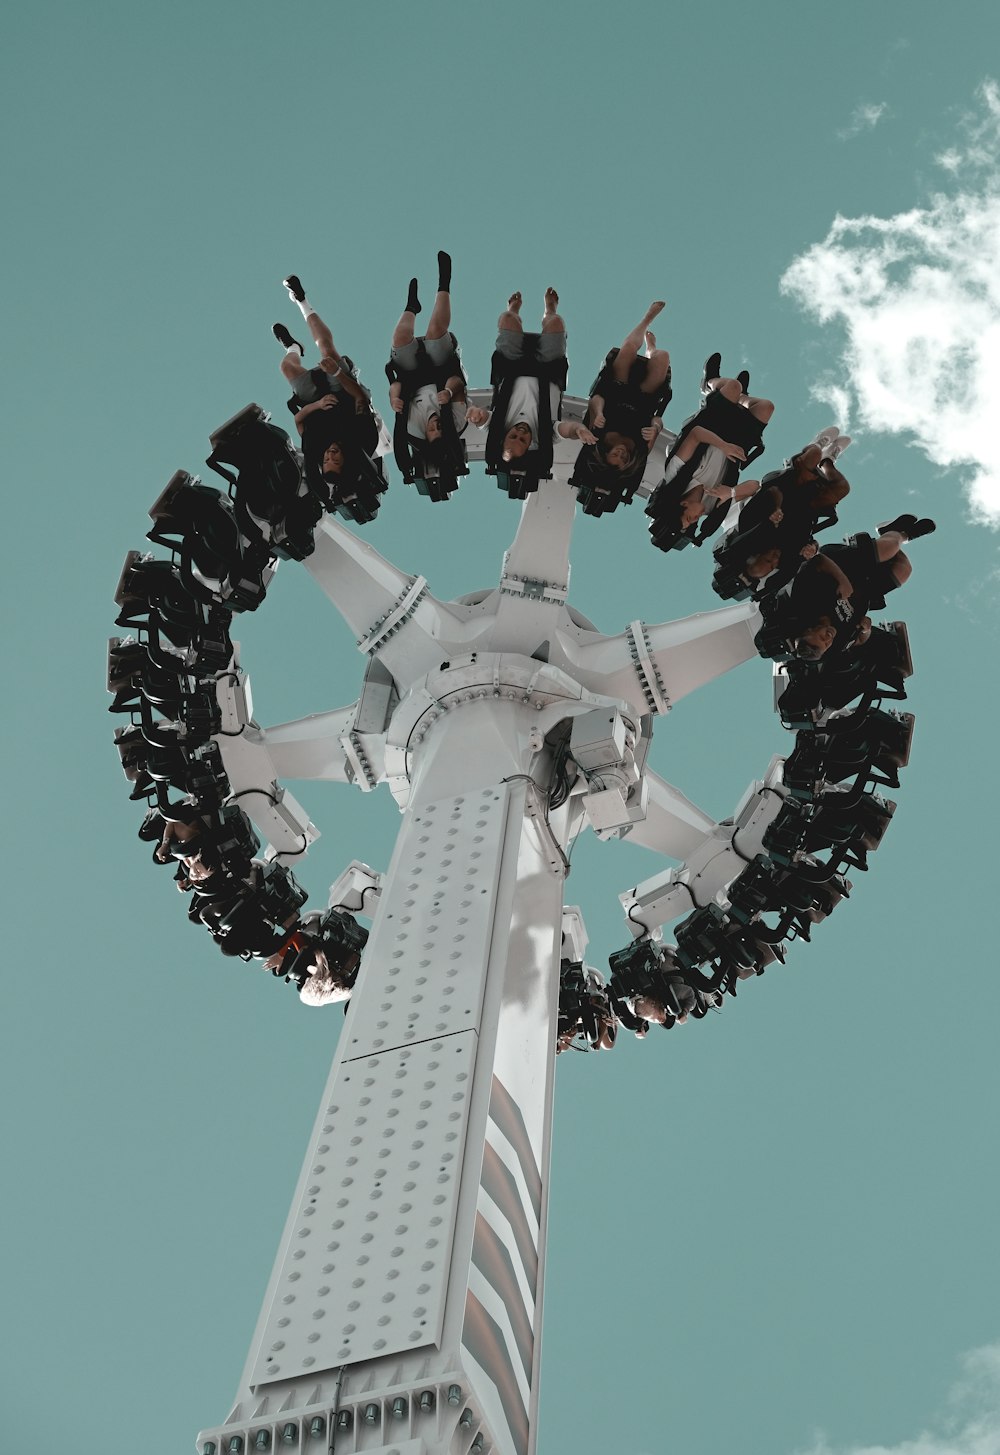 low-angle photography of people riding a drop-down amusement tower